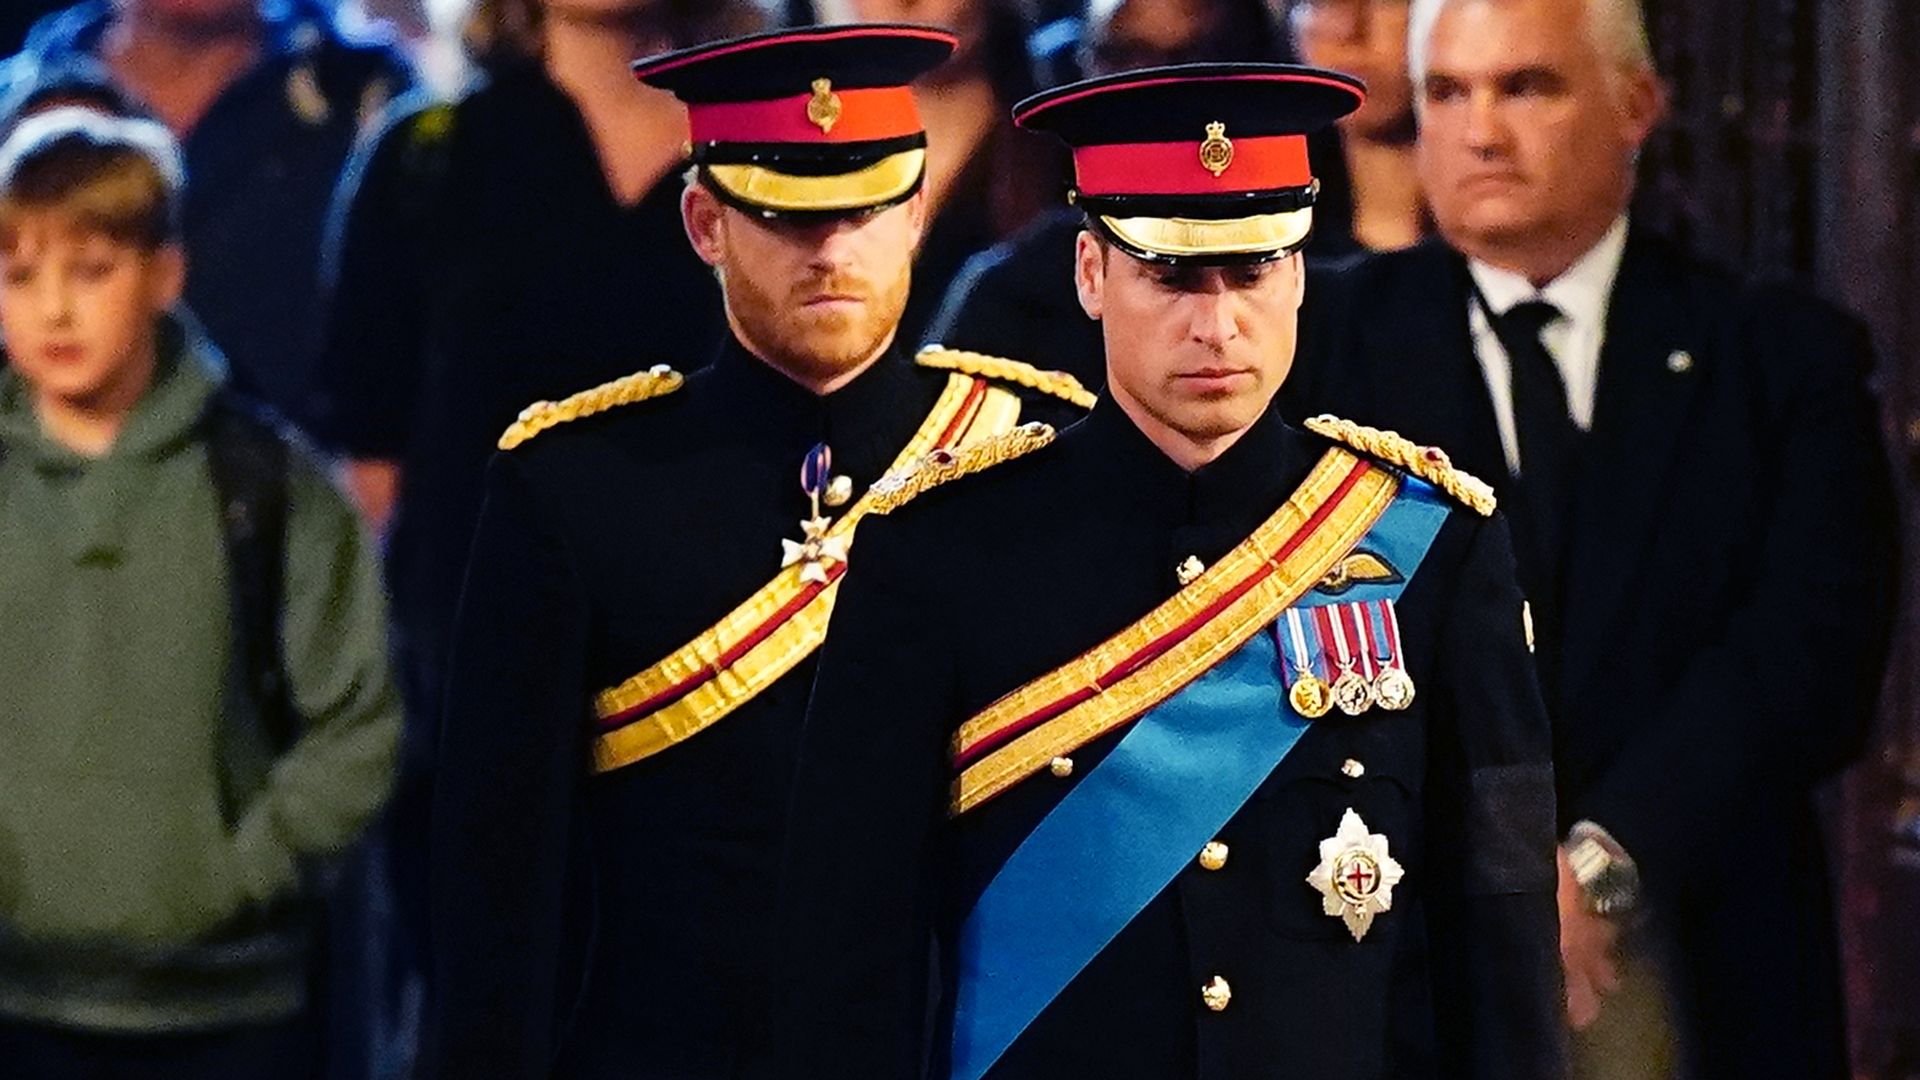 Prince William, Prince of Wales, and Prince Harry, Duke of Sussex, arrive in military uniforms to hold a vigil for their grandmother, Queen Elizabeth II. 